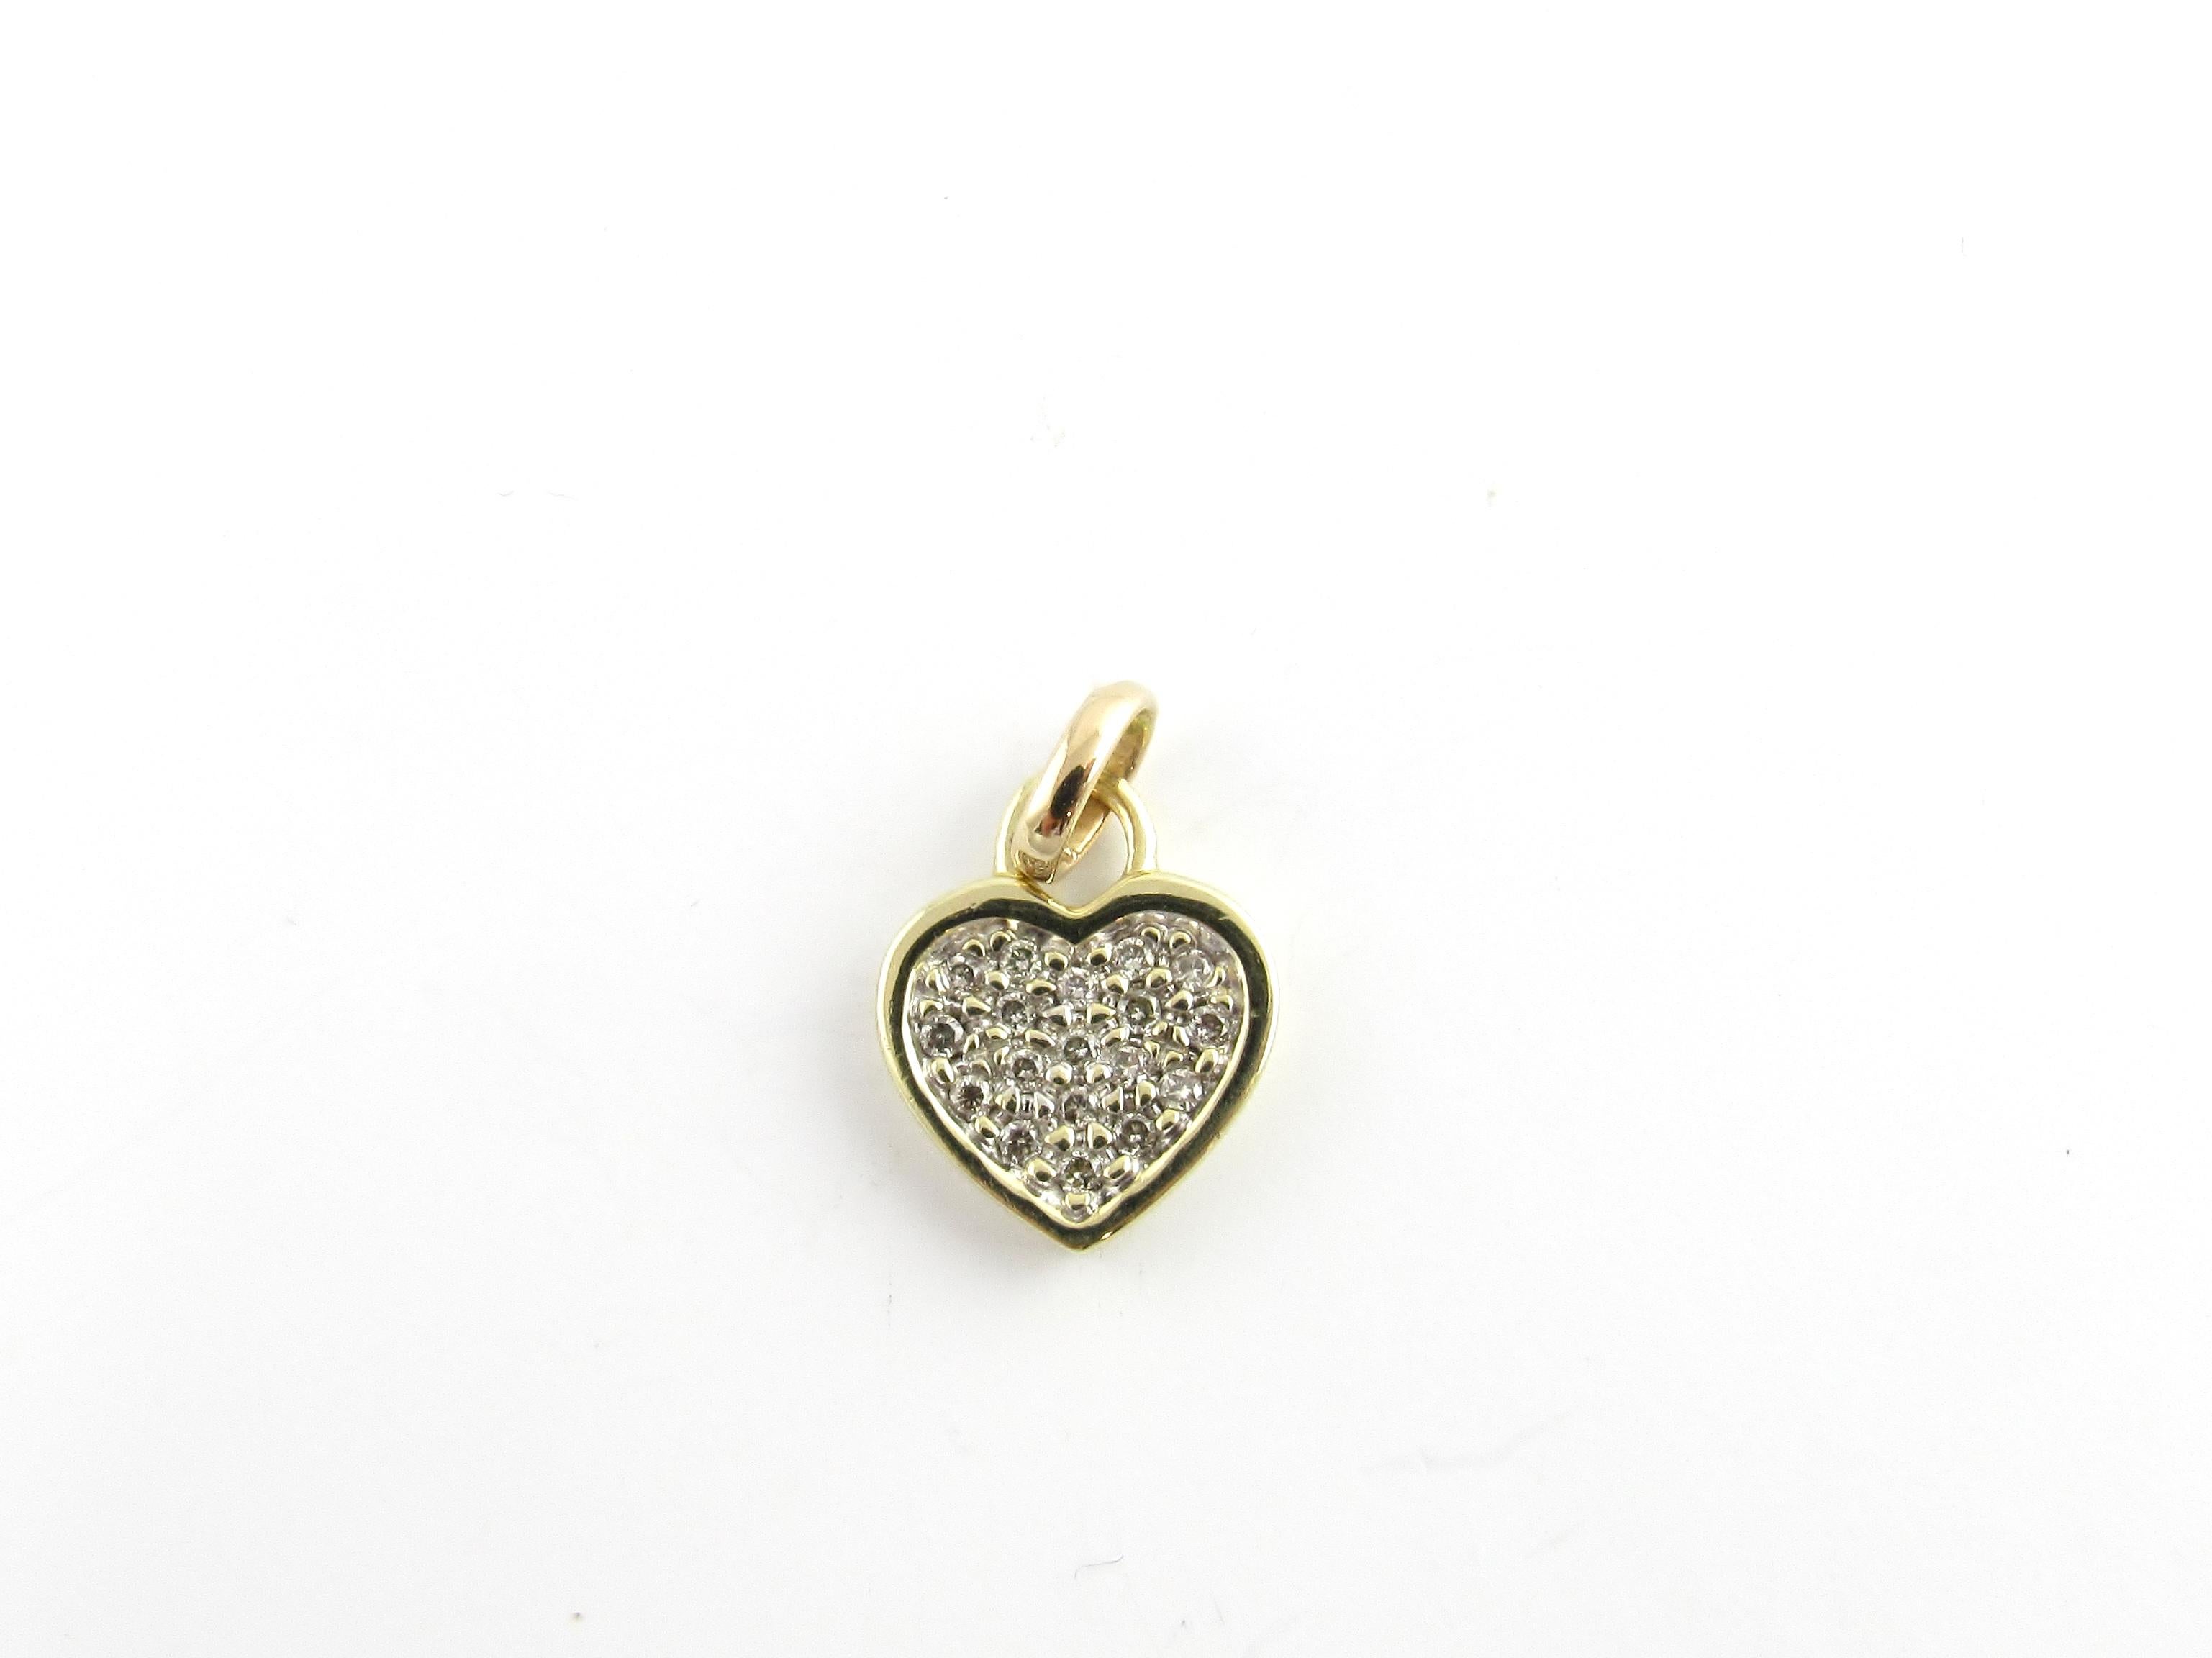 Vintage 10 Karat Yellow Gold Diamond Heart Pendant

This sparkling heart pendant features 18 round brilliant cut diamonds set in classic 10K yellow gold.

Approximate total diamond weight: .18 ct.

Diamond color: I

Diamond clarity: SI1

Size: 16 mm